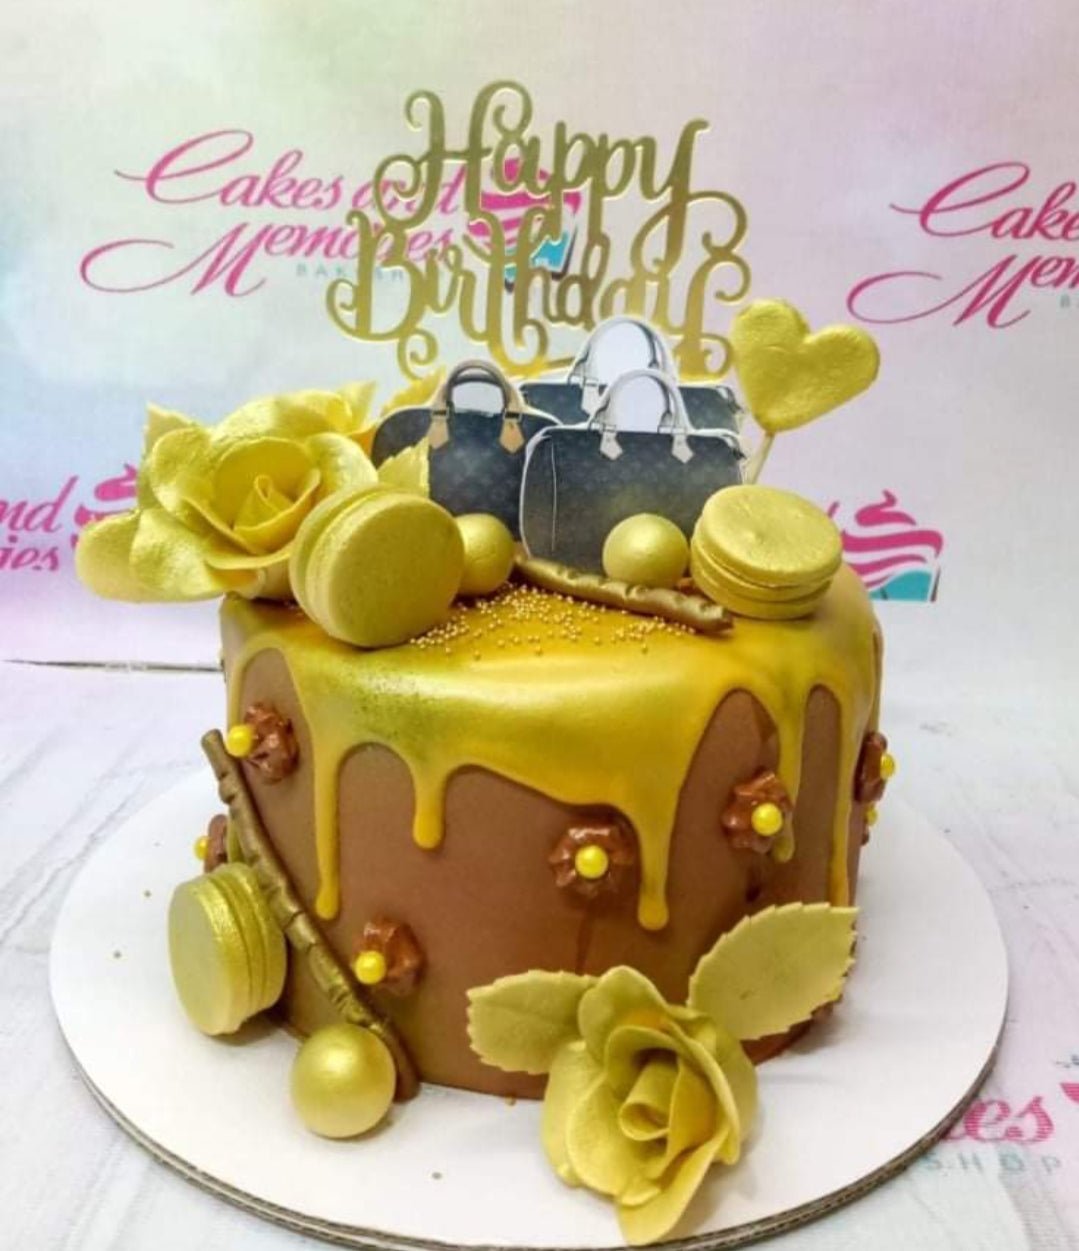 Bags & Shoes Cake - 1107 – Cakes and Memories Bakeshop